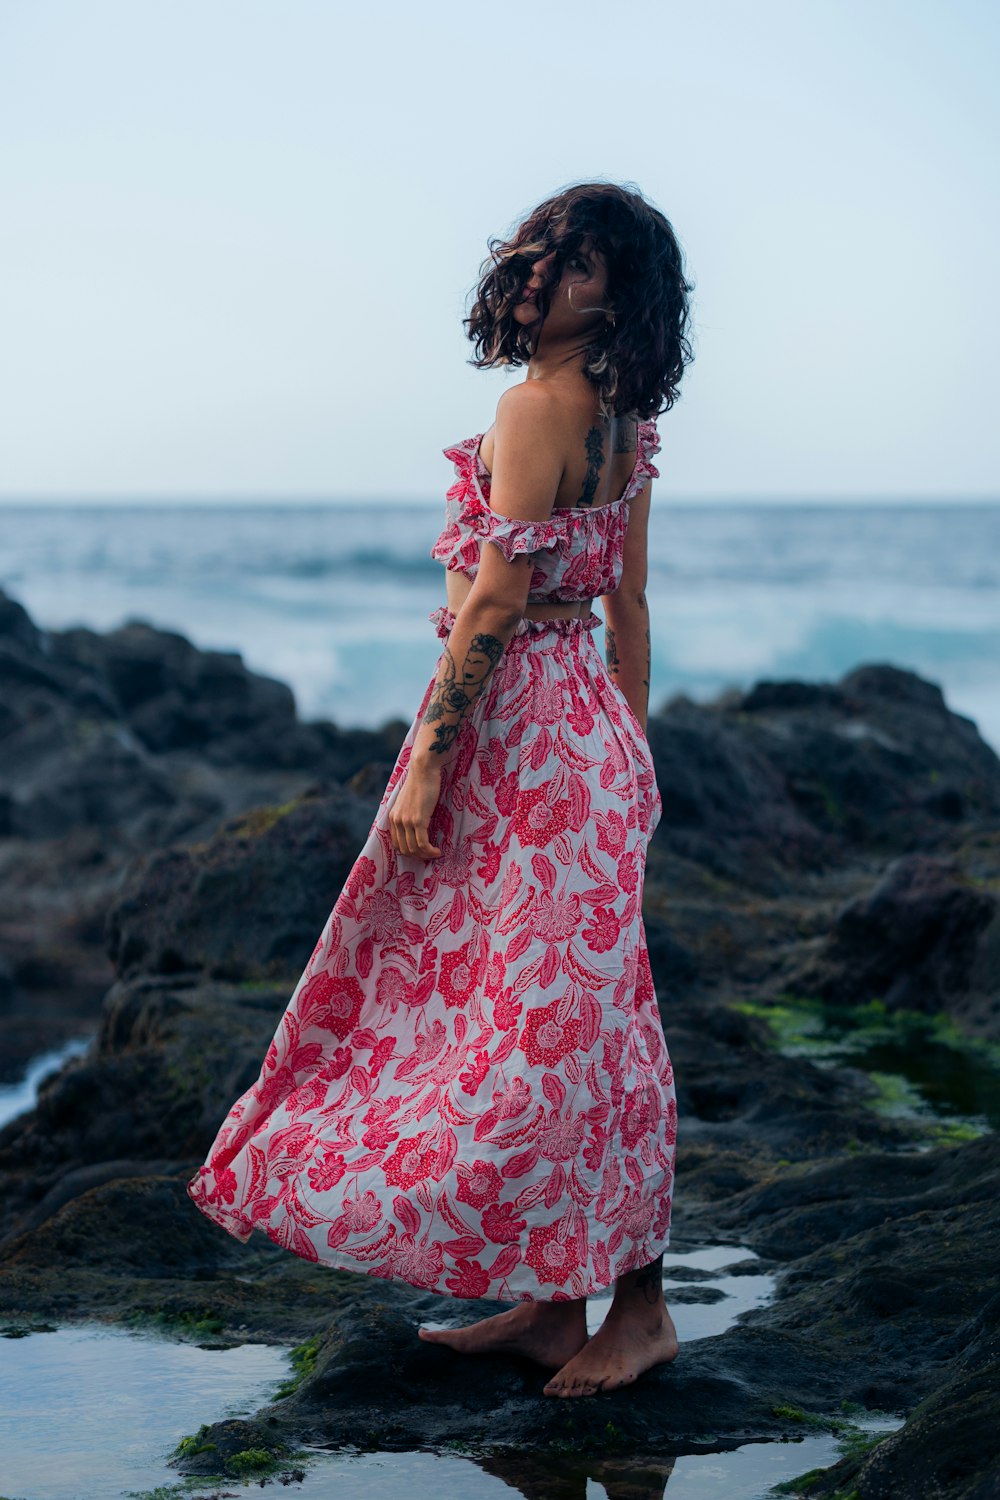 a person in a dress standing on a rocky beach